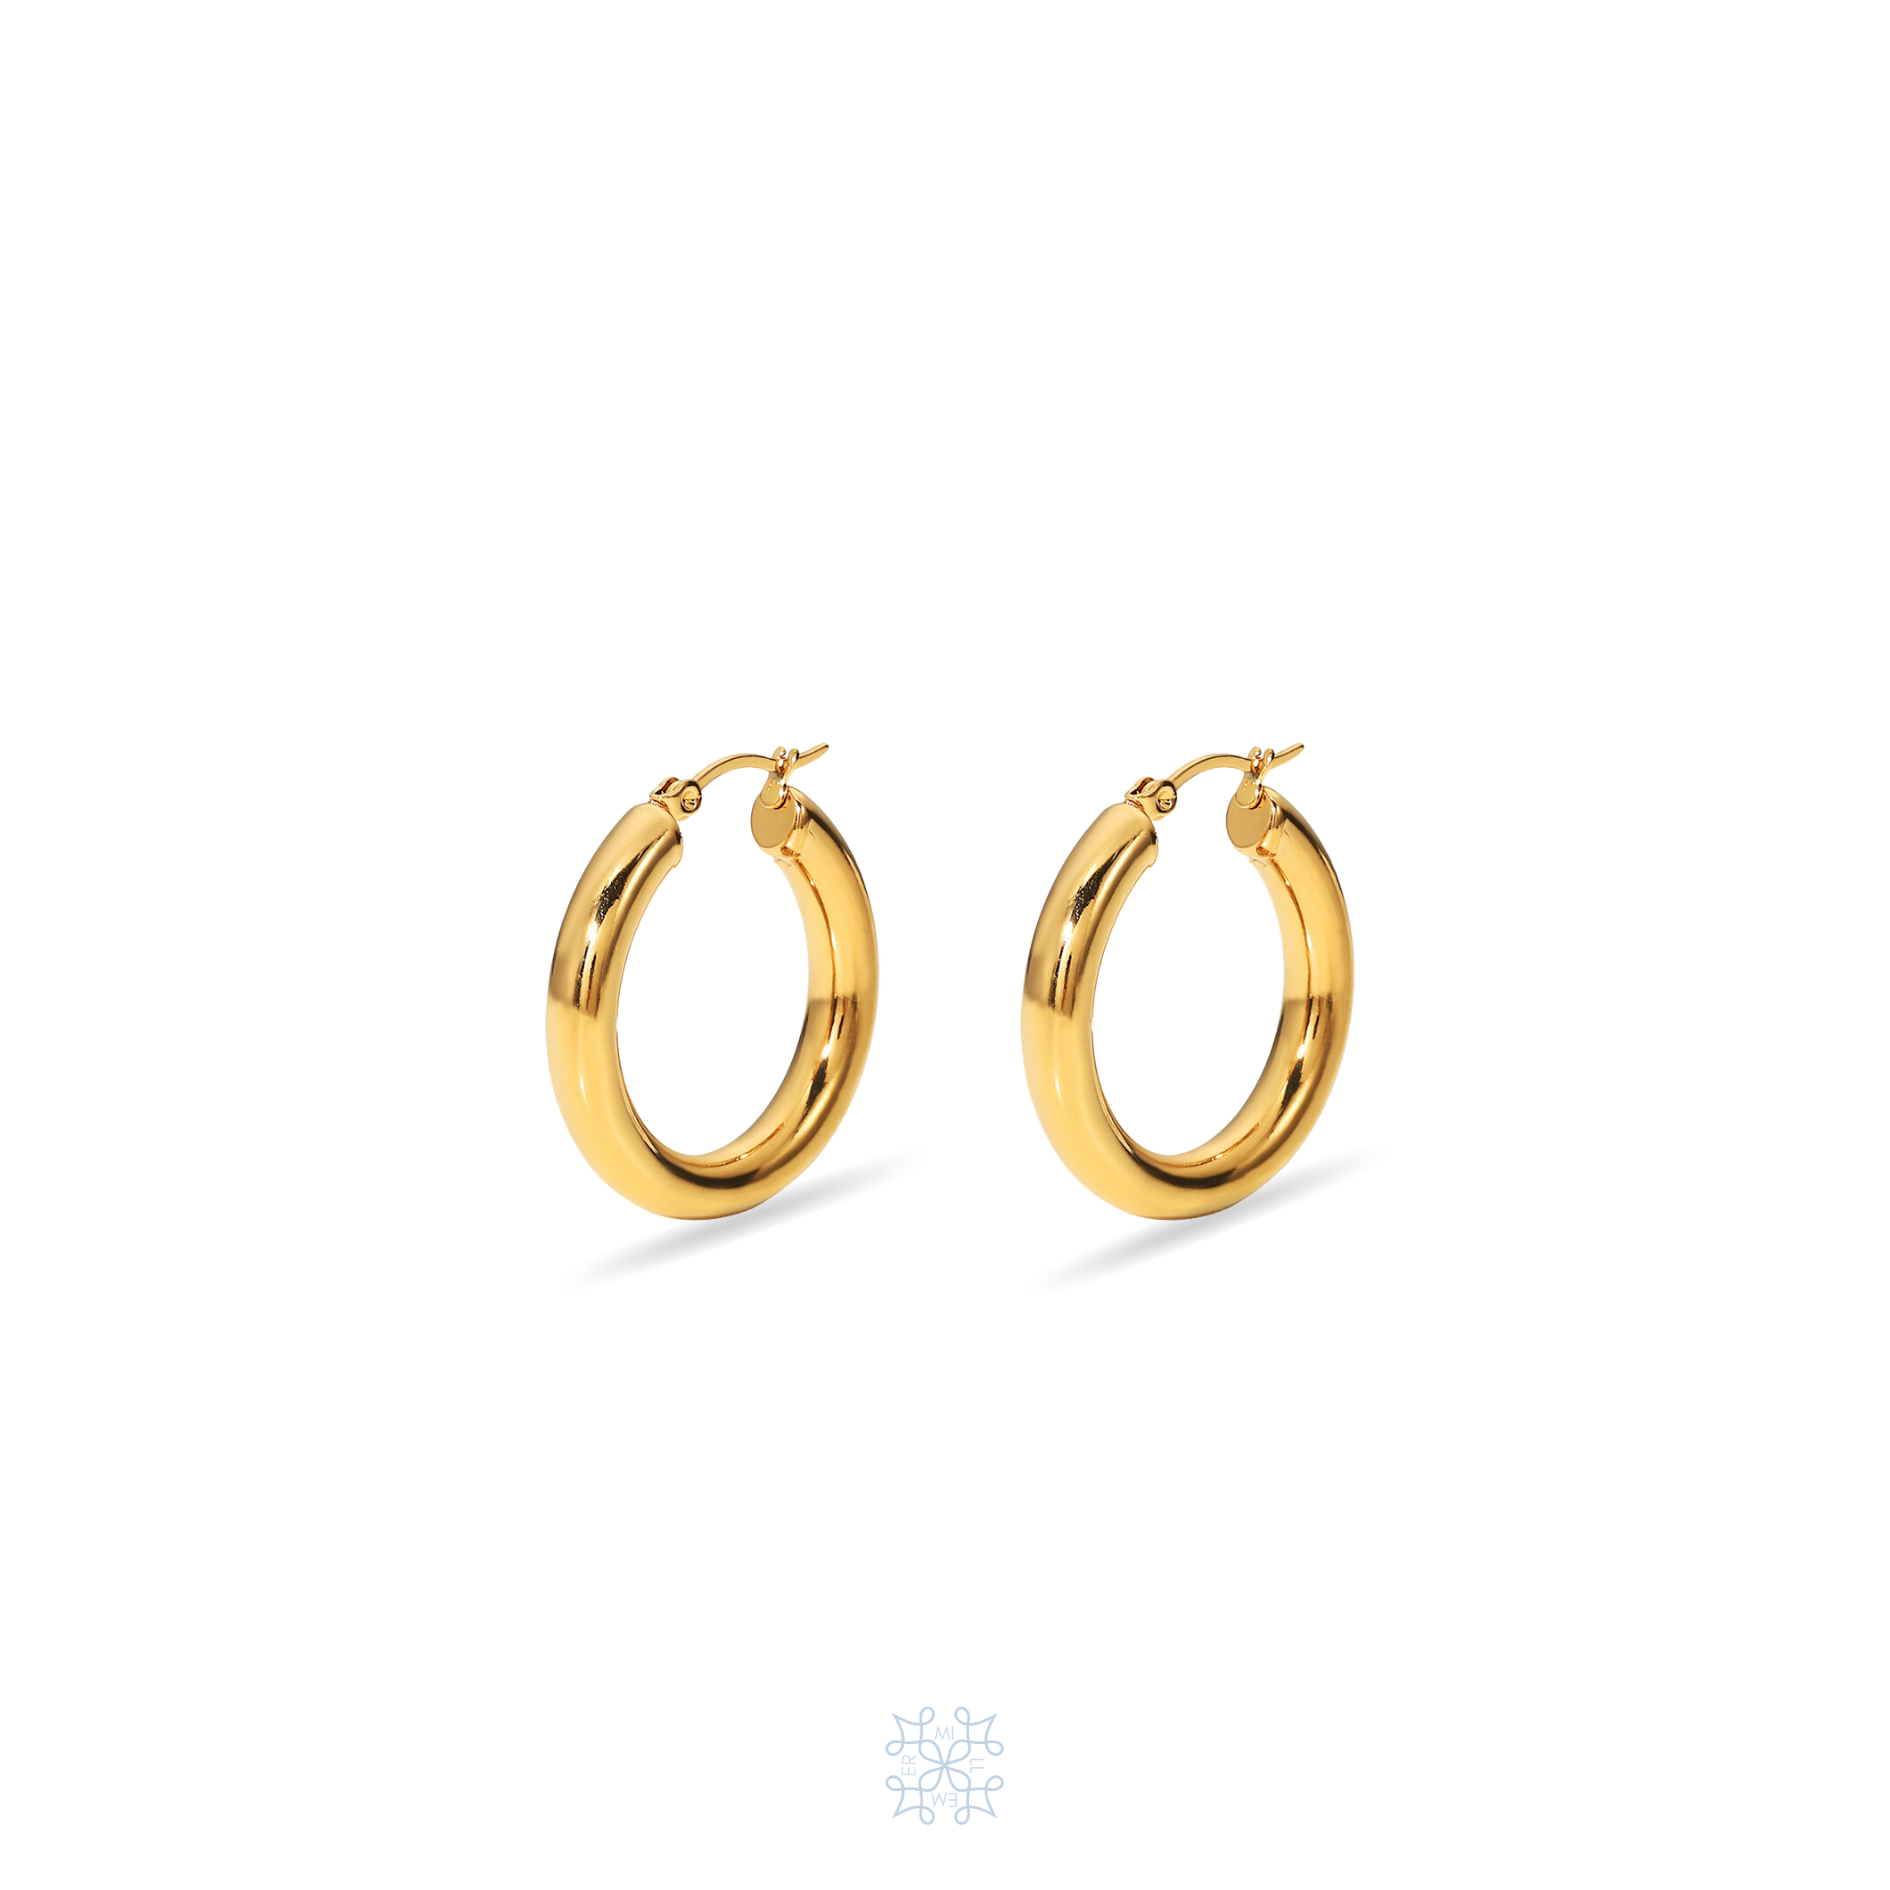 Gold plated hoops. Round circle earrings plated in gold.